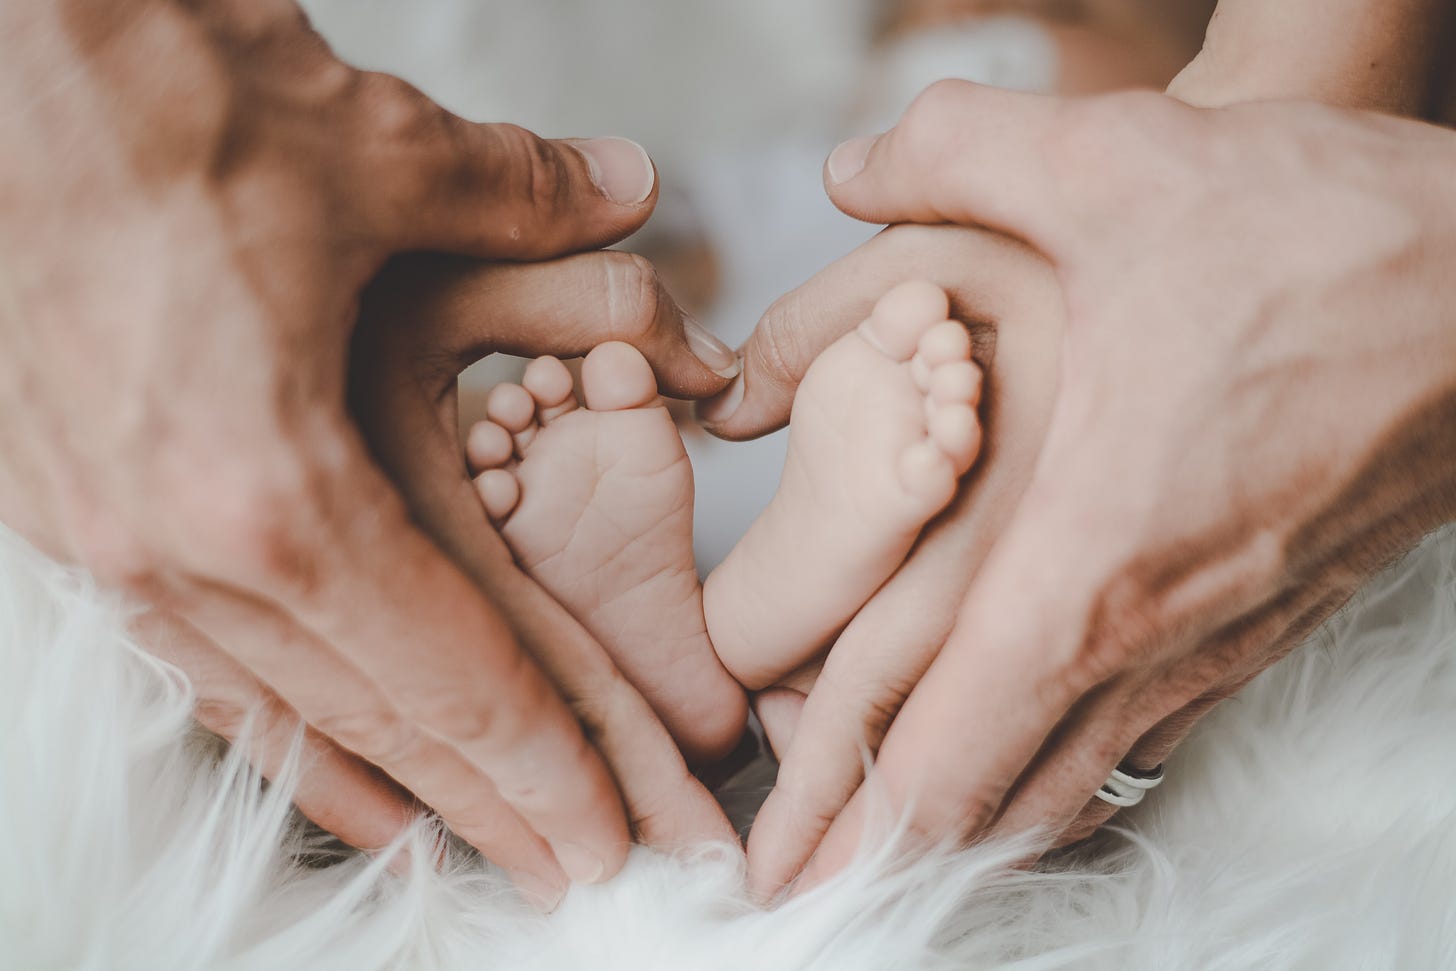 hands of man and woman cradling baby's feet